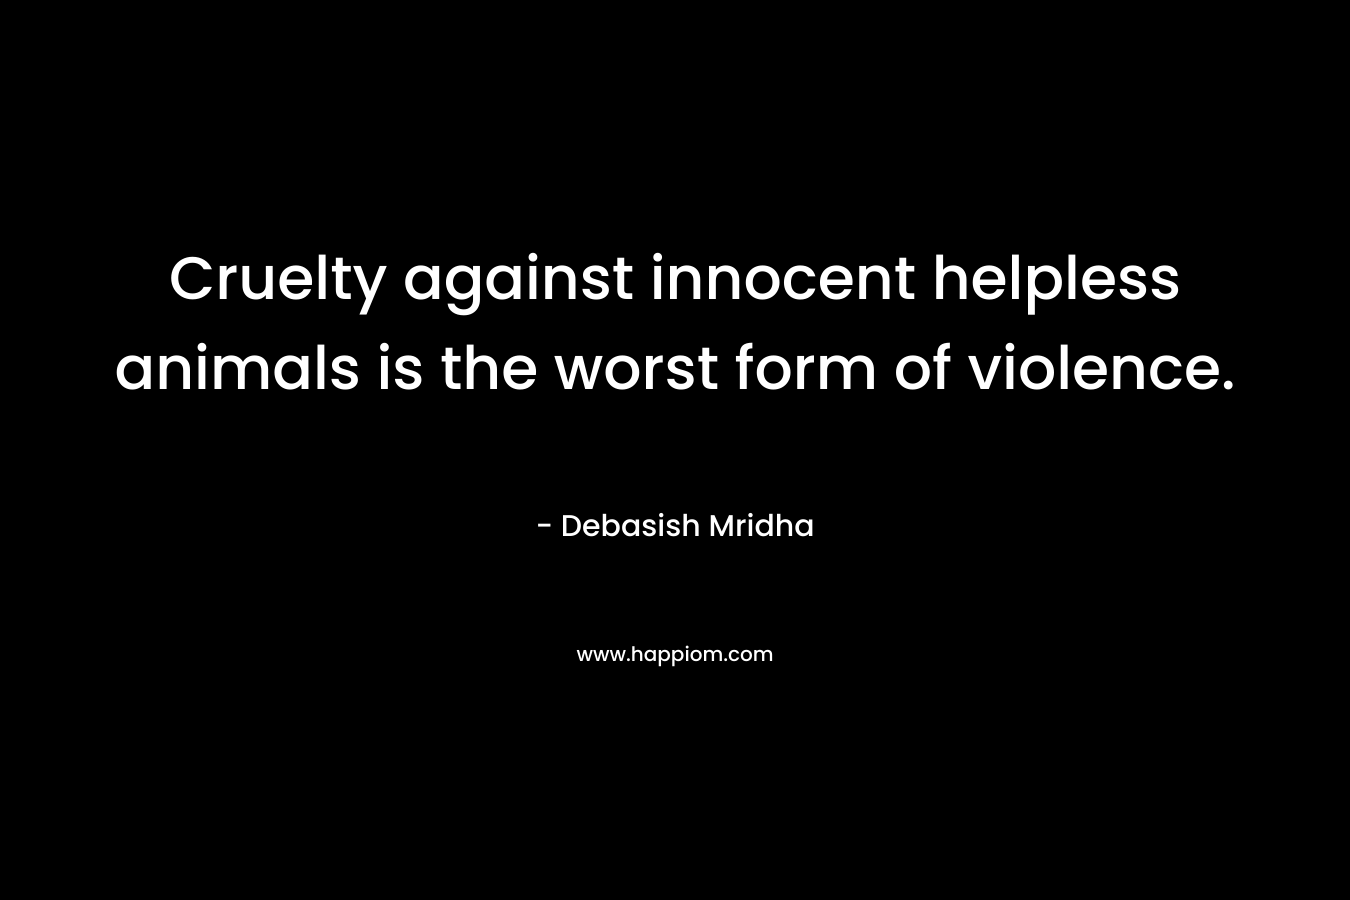 Cruelty against innocent helpless animals is the worst form of violence.